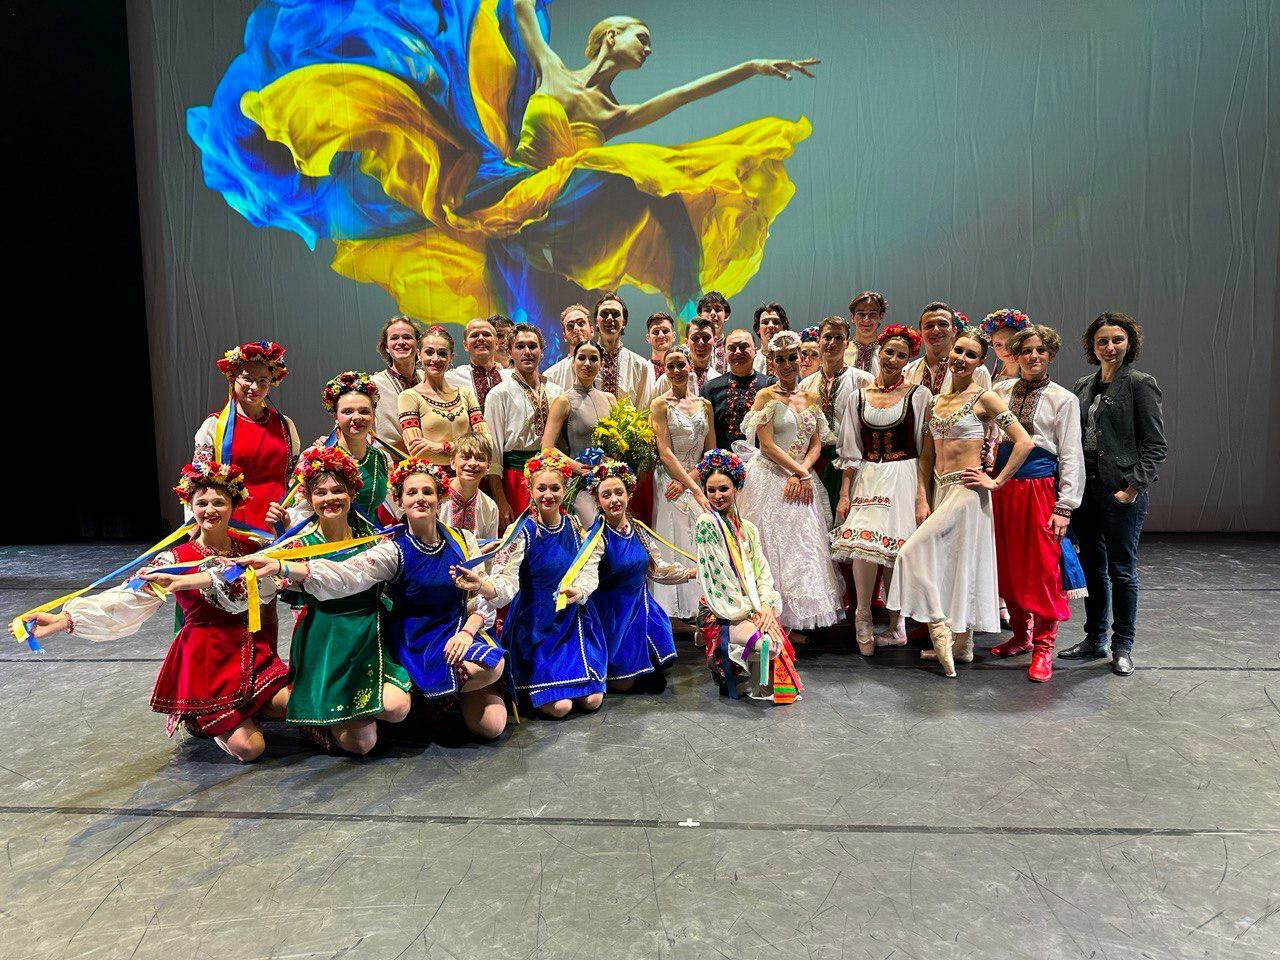 Artists of the National Opera of Ukraine raised about $600 thousand during a charity tour in Canada